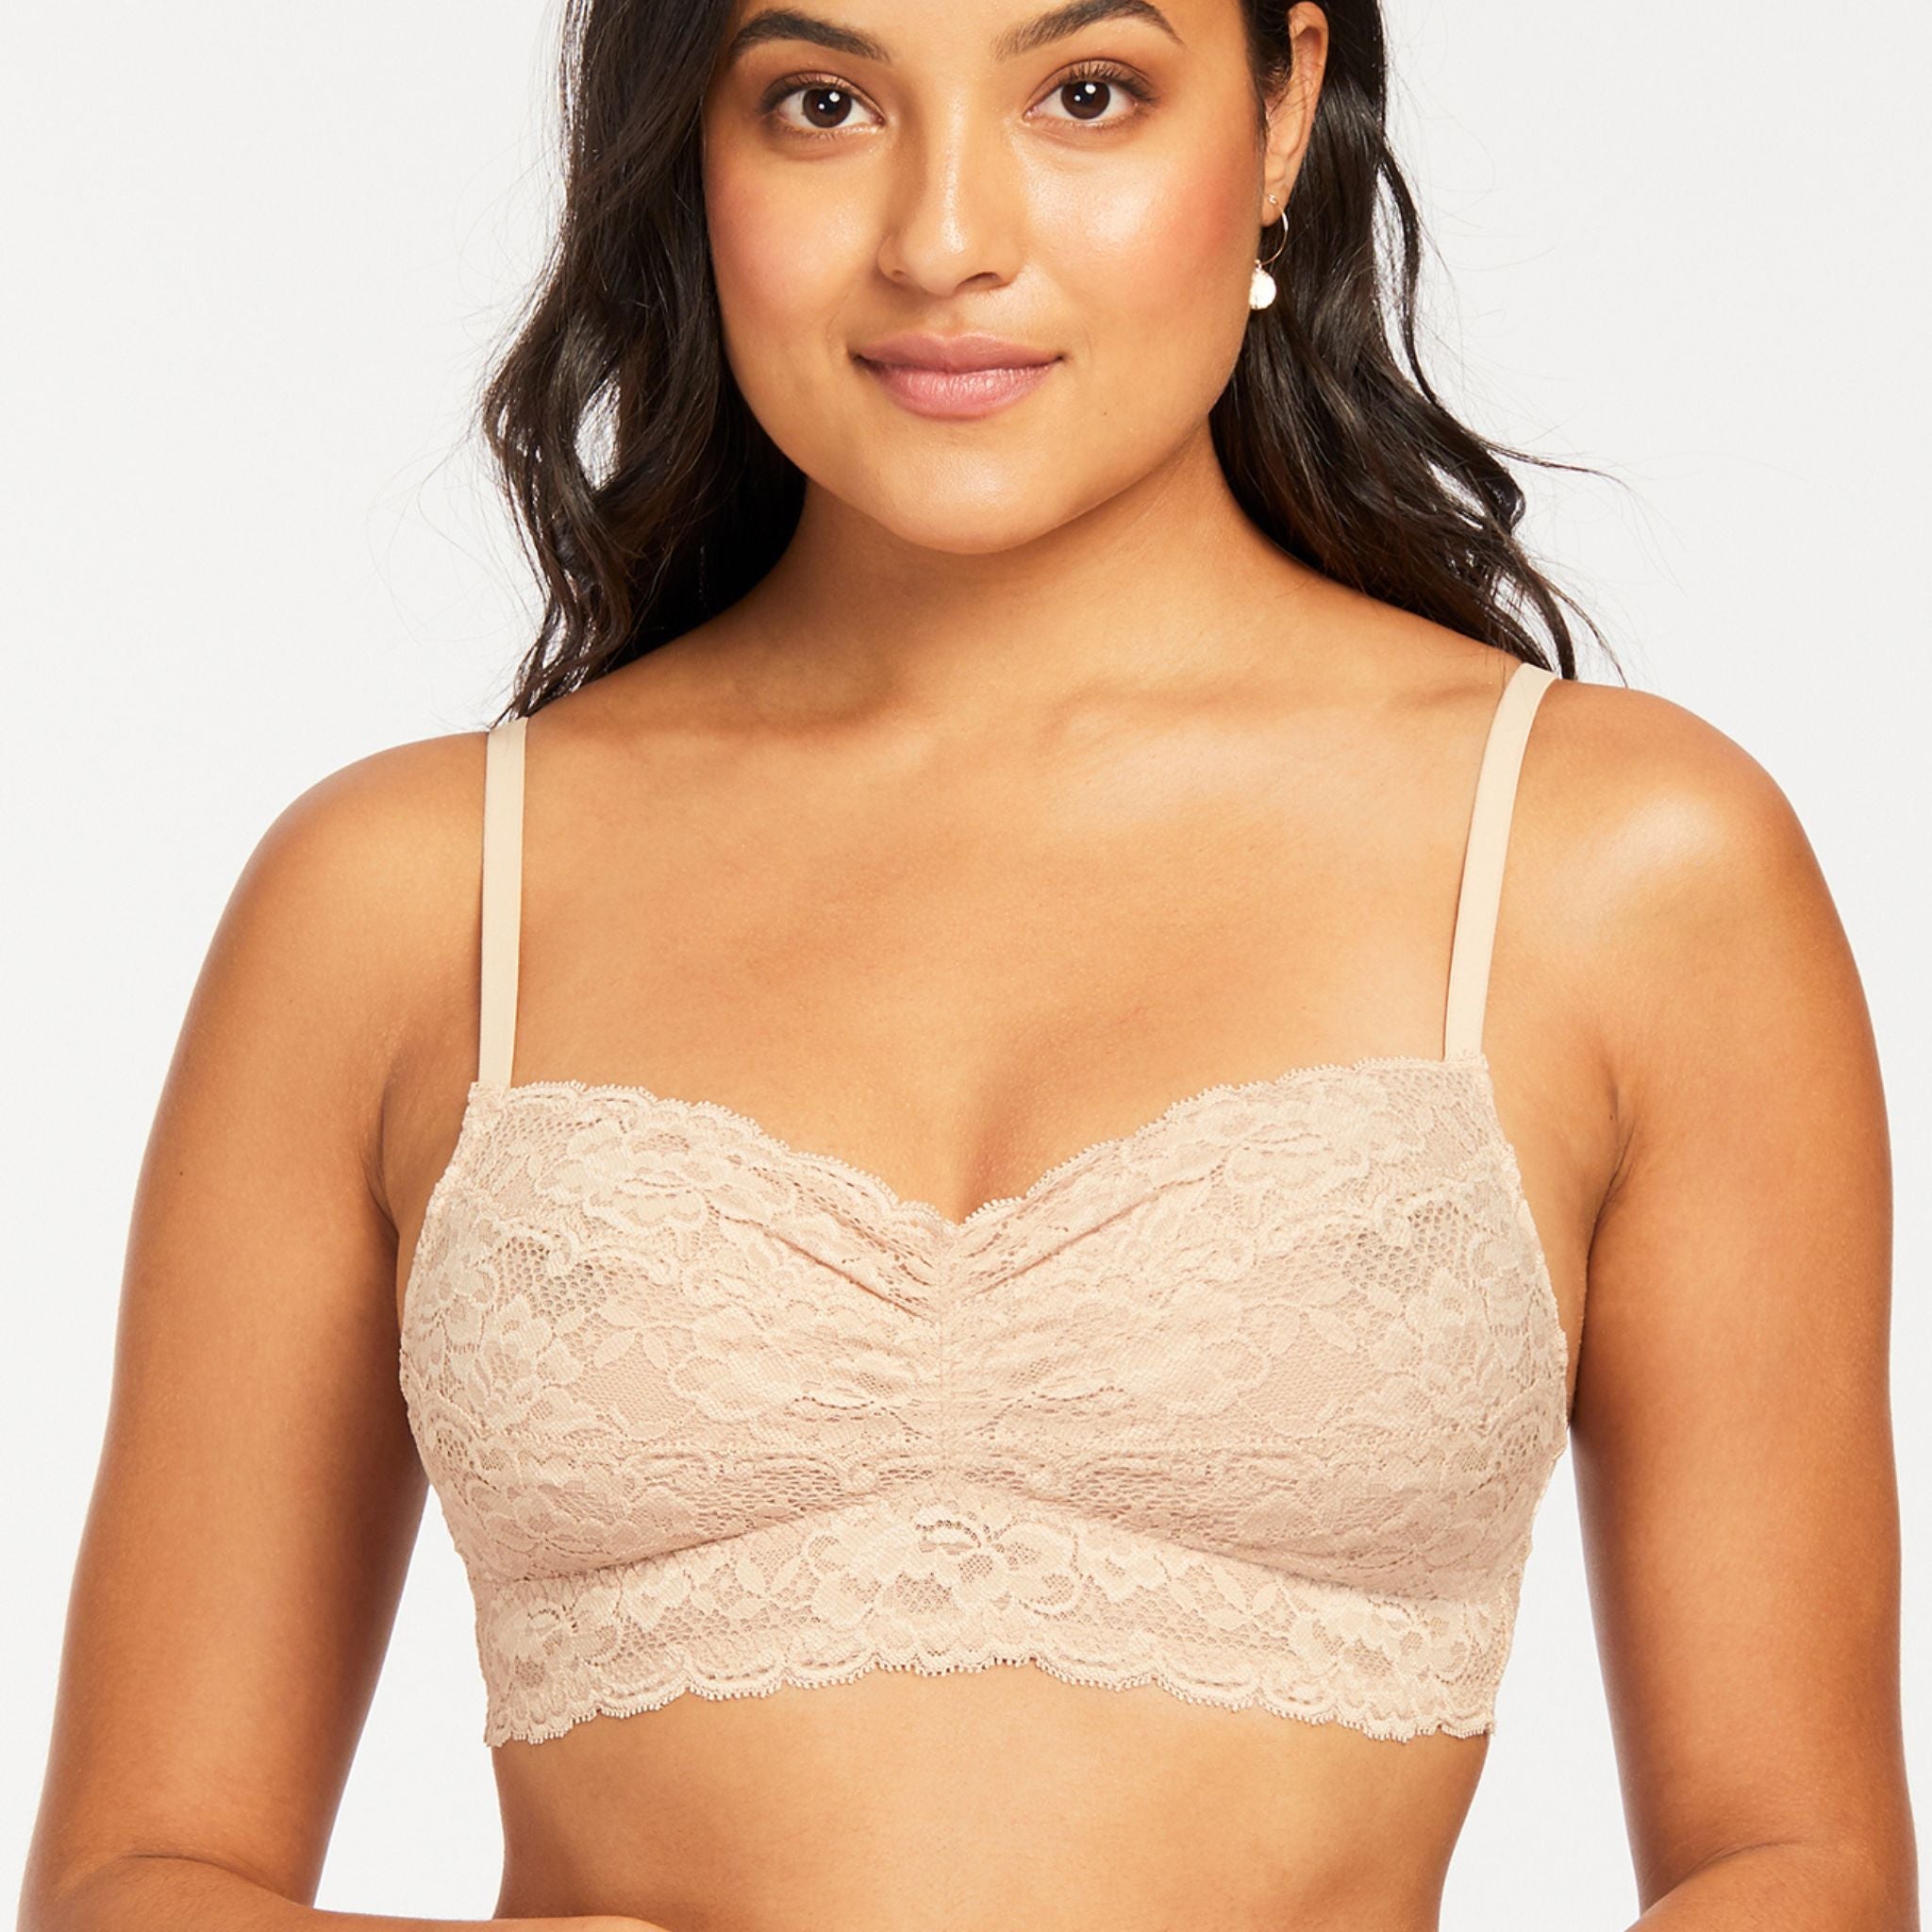 Finally, a bralette designed for fuller cup sizes! Sized like a bra with band and cup sizes, the lace Bralette was designed to support women with larger busts and smaller backs. Wire-free and made with smooth floral lace, this bralette also features convertible straps that can be styled classic or crisscross to complement your look for the day.